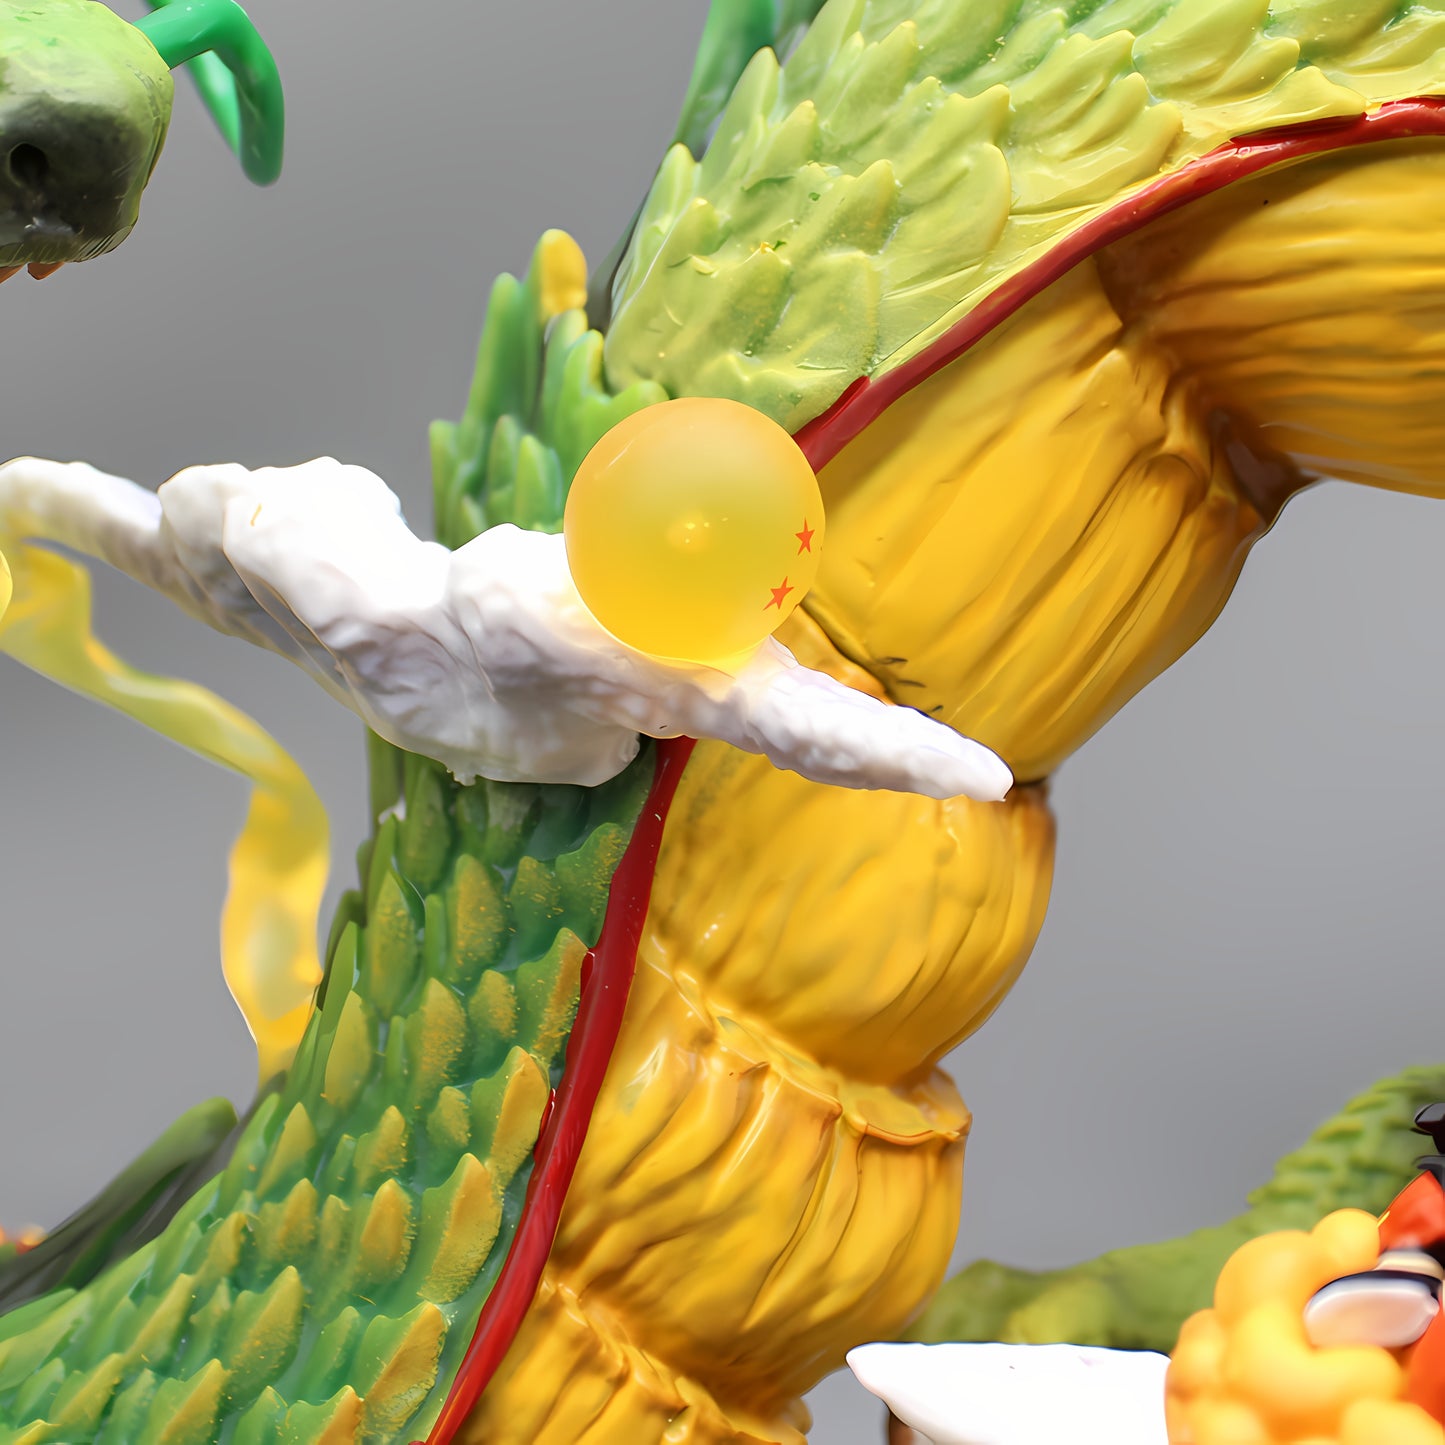 A close-up of a segment of the Shenron dragon figurine from Dragon Ball Z, showcasing a translucent Dragon Ball with red stars clasped in Shenron's body. The image focuses on the golden-yellow segments of Shenron's underbelly, textured green scales, and white cloud-like accents, against a soft gray background that emphasizes the vibrant colors and fine details of the collectible.